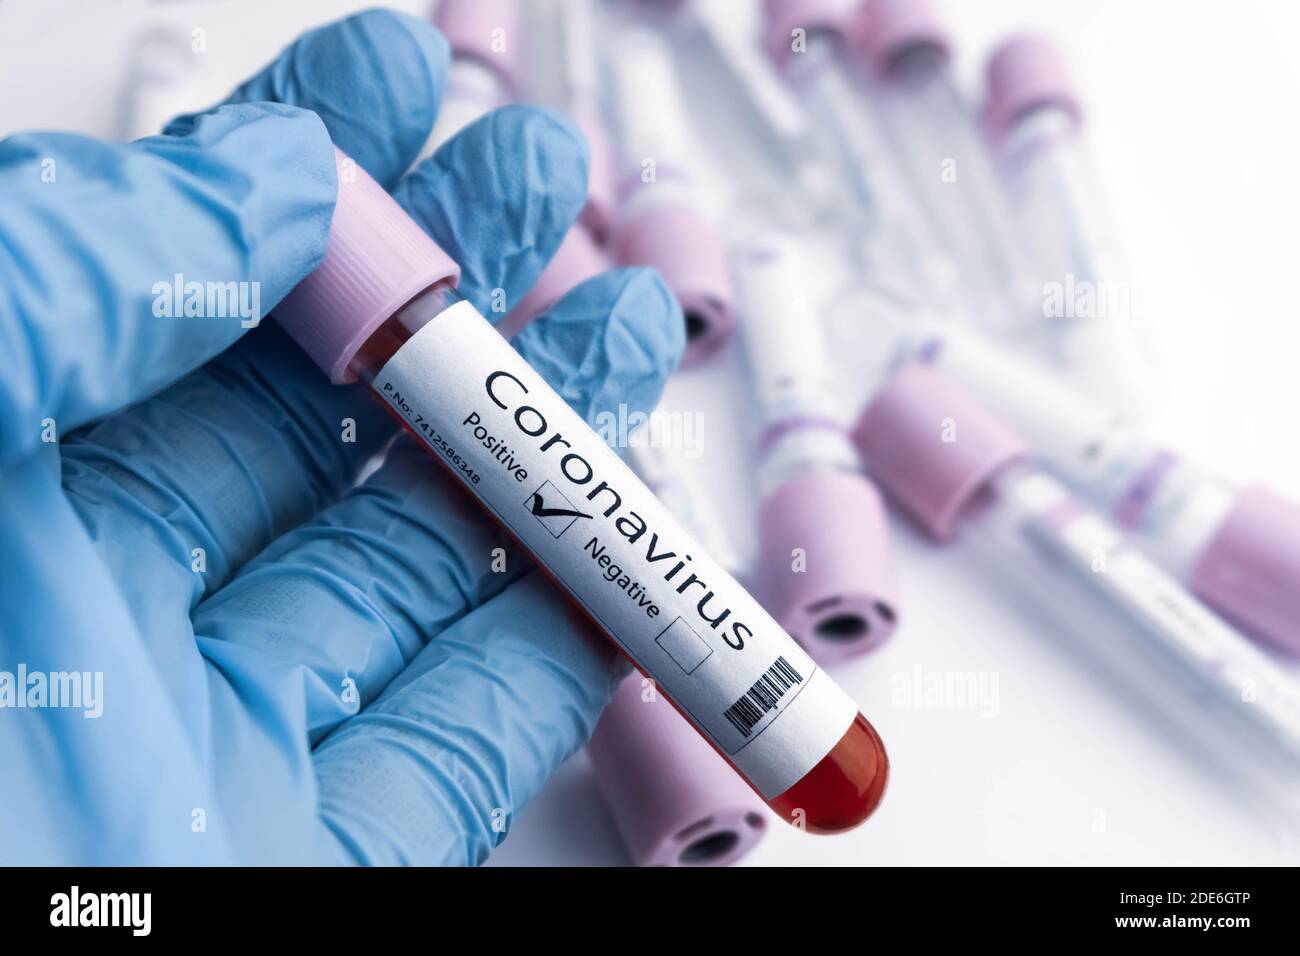 Positive COVID-19 test and laboratory sample of blood testing for diagnosis new Coronavirus outbreaking concept. Stock Photo